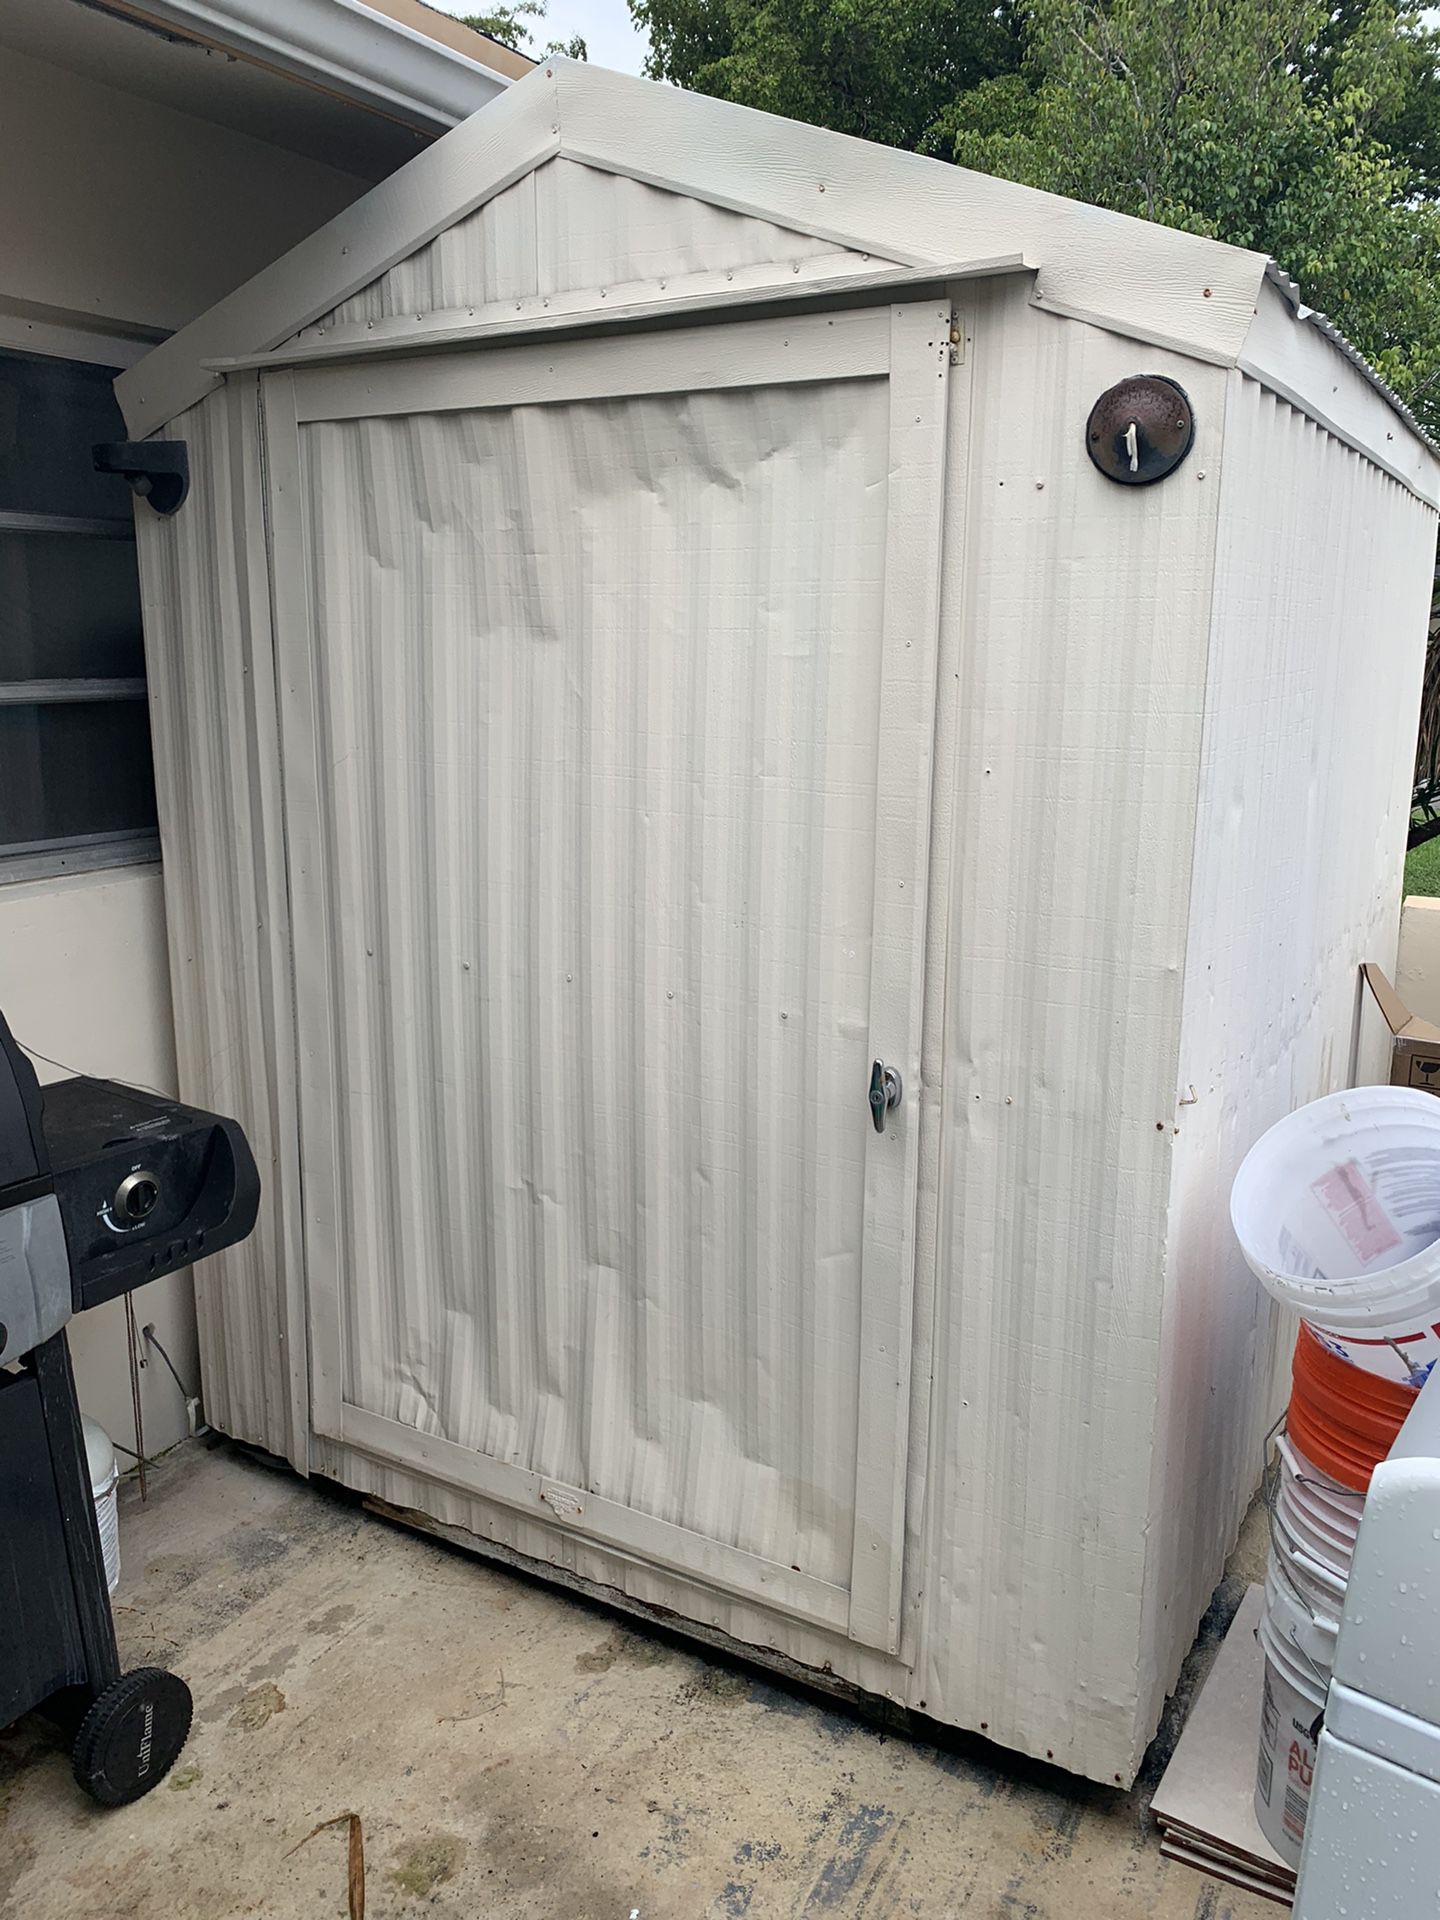 Aluminum shed with shelves and electrical hookups